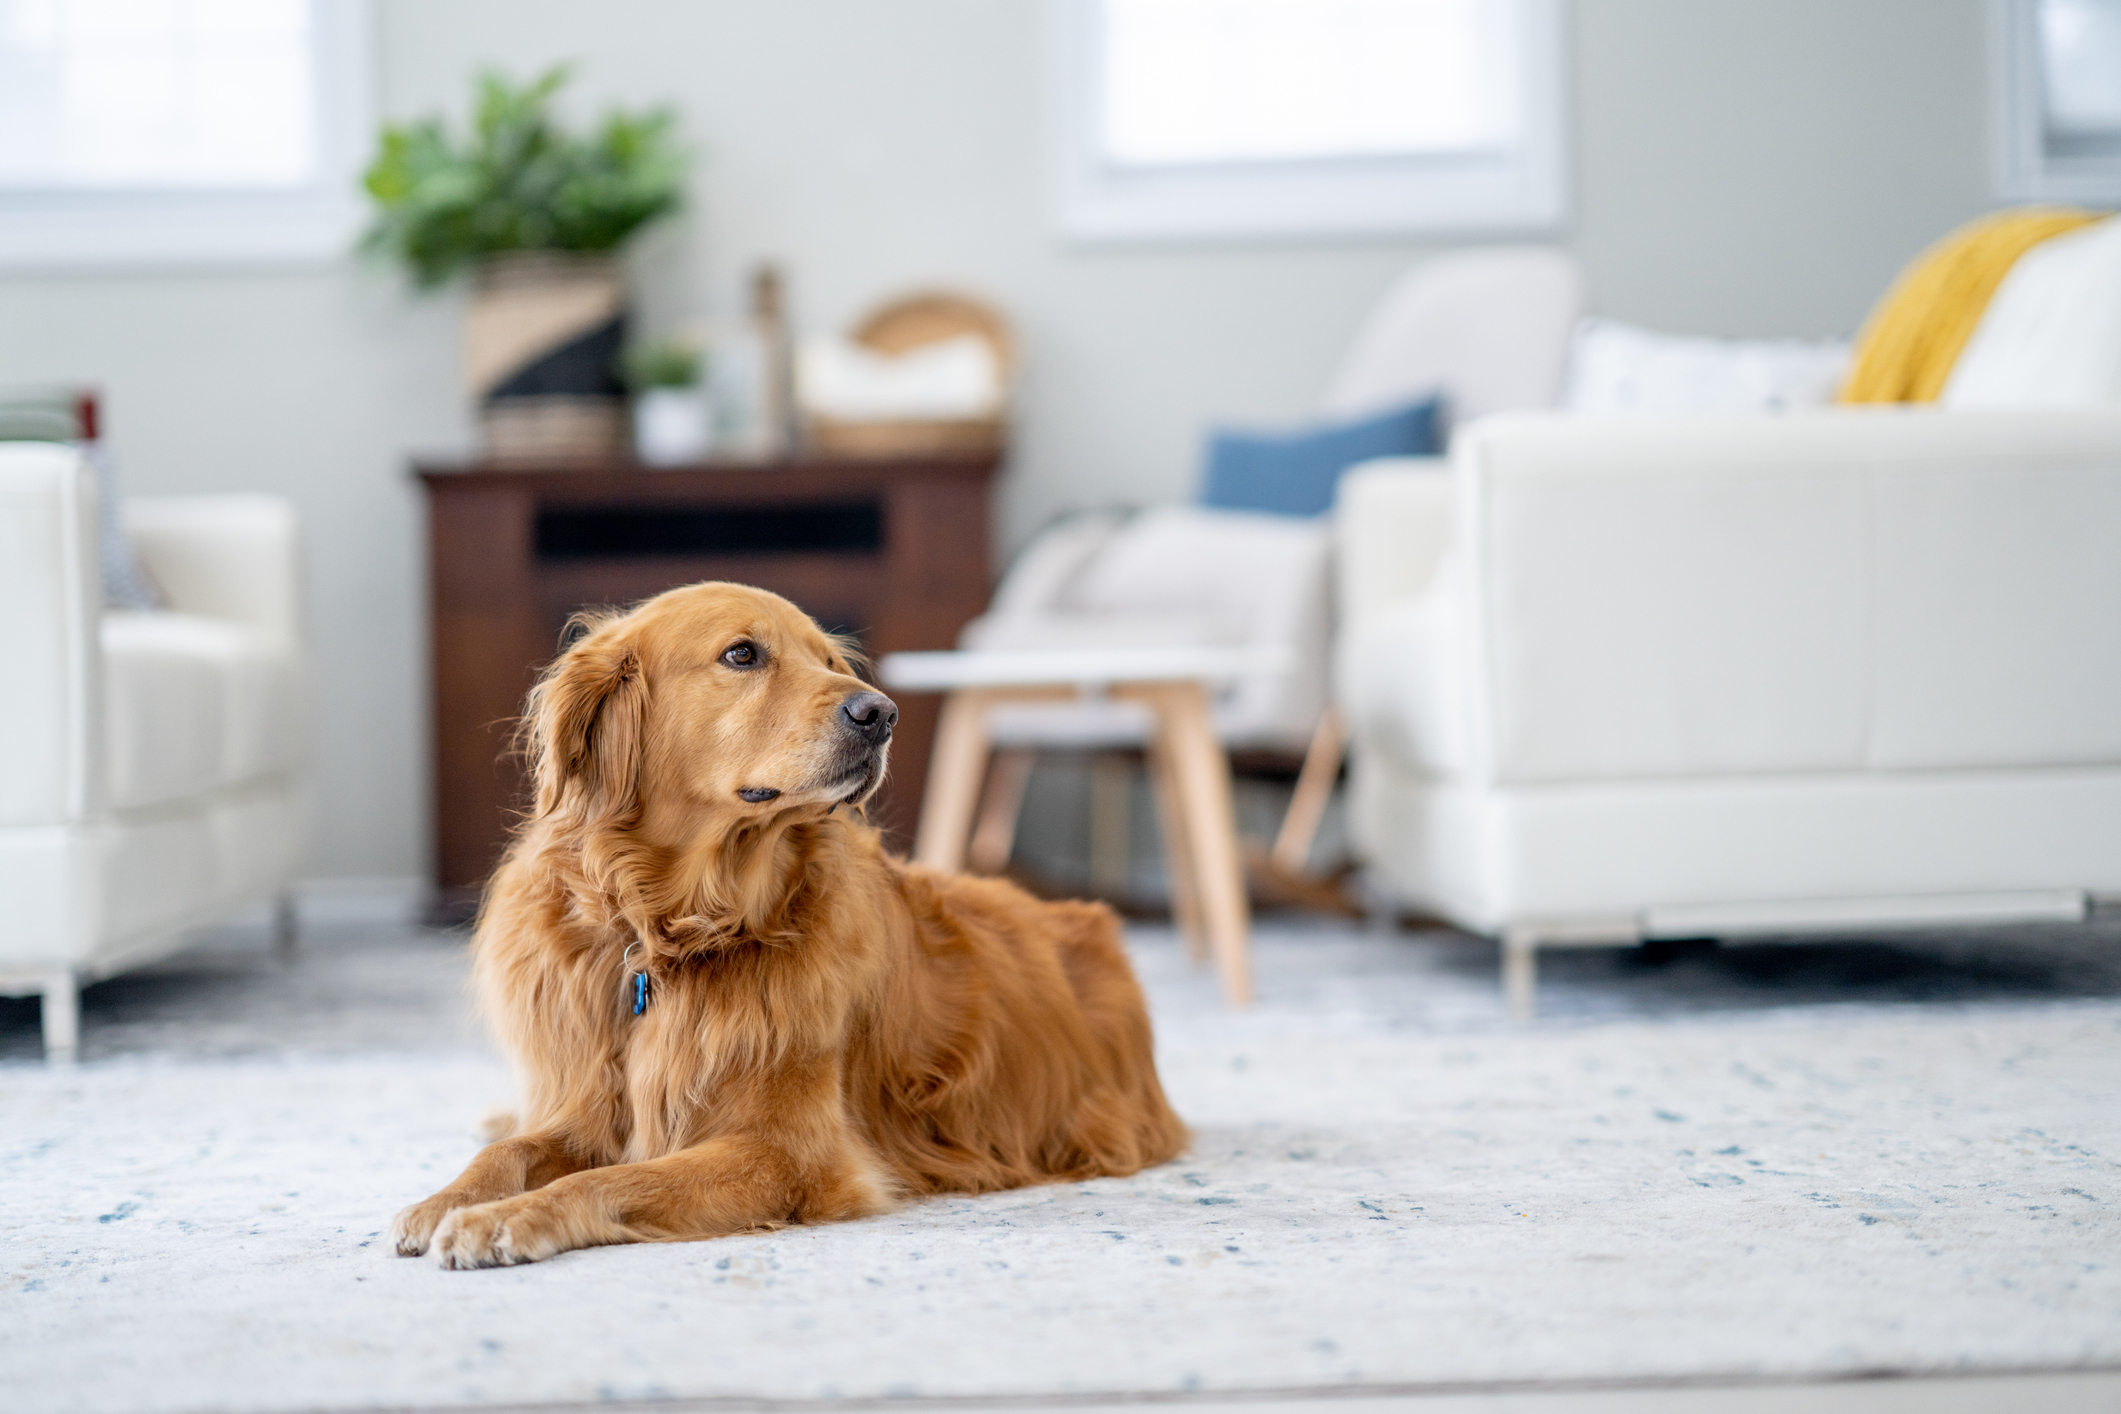 Golden Retriever lying on a rug in a cozy living room setting